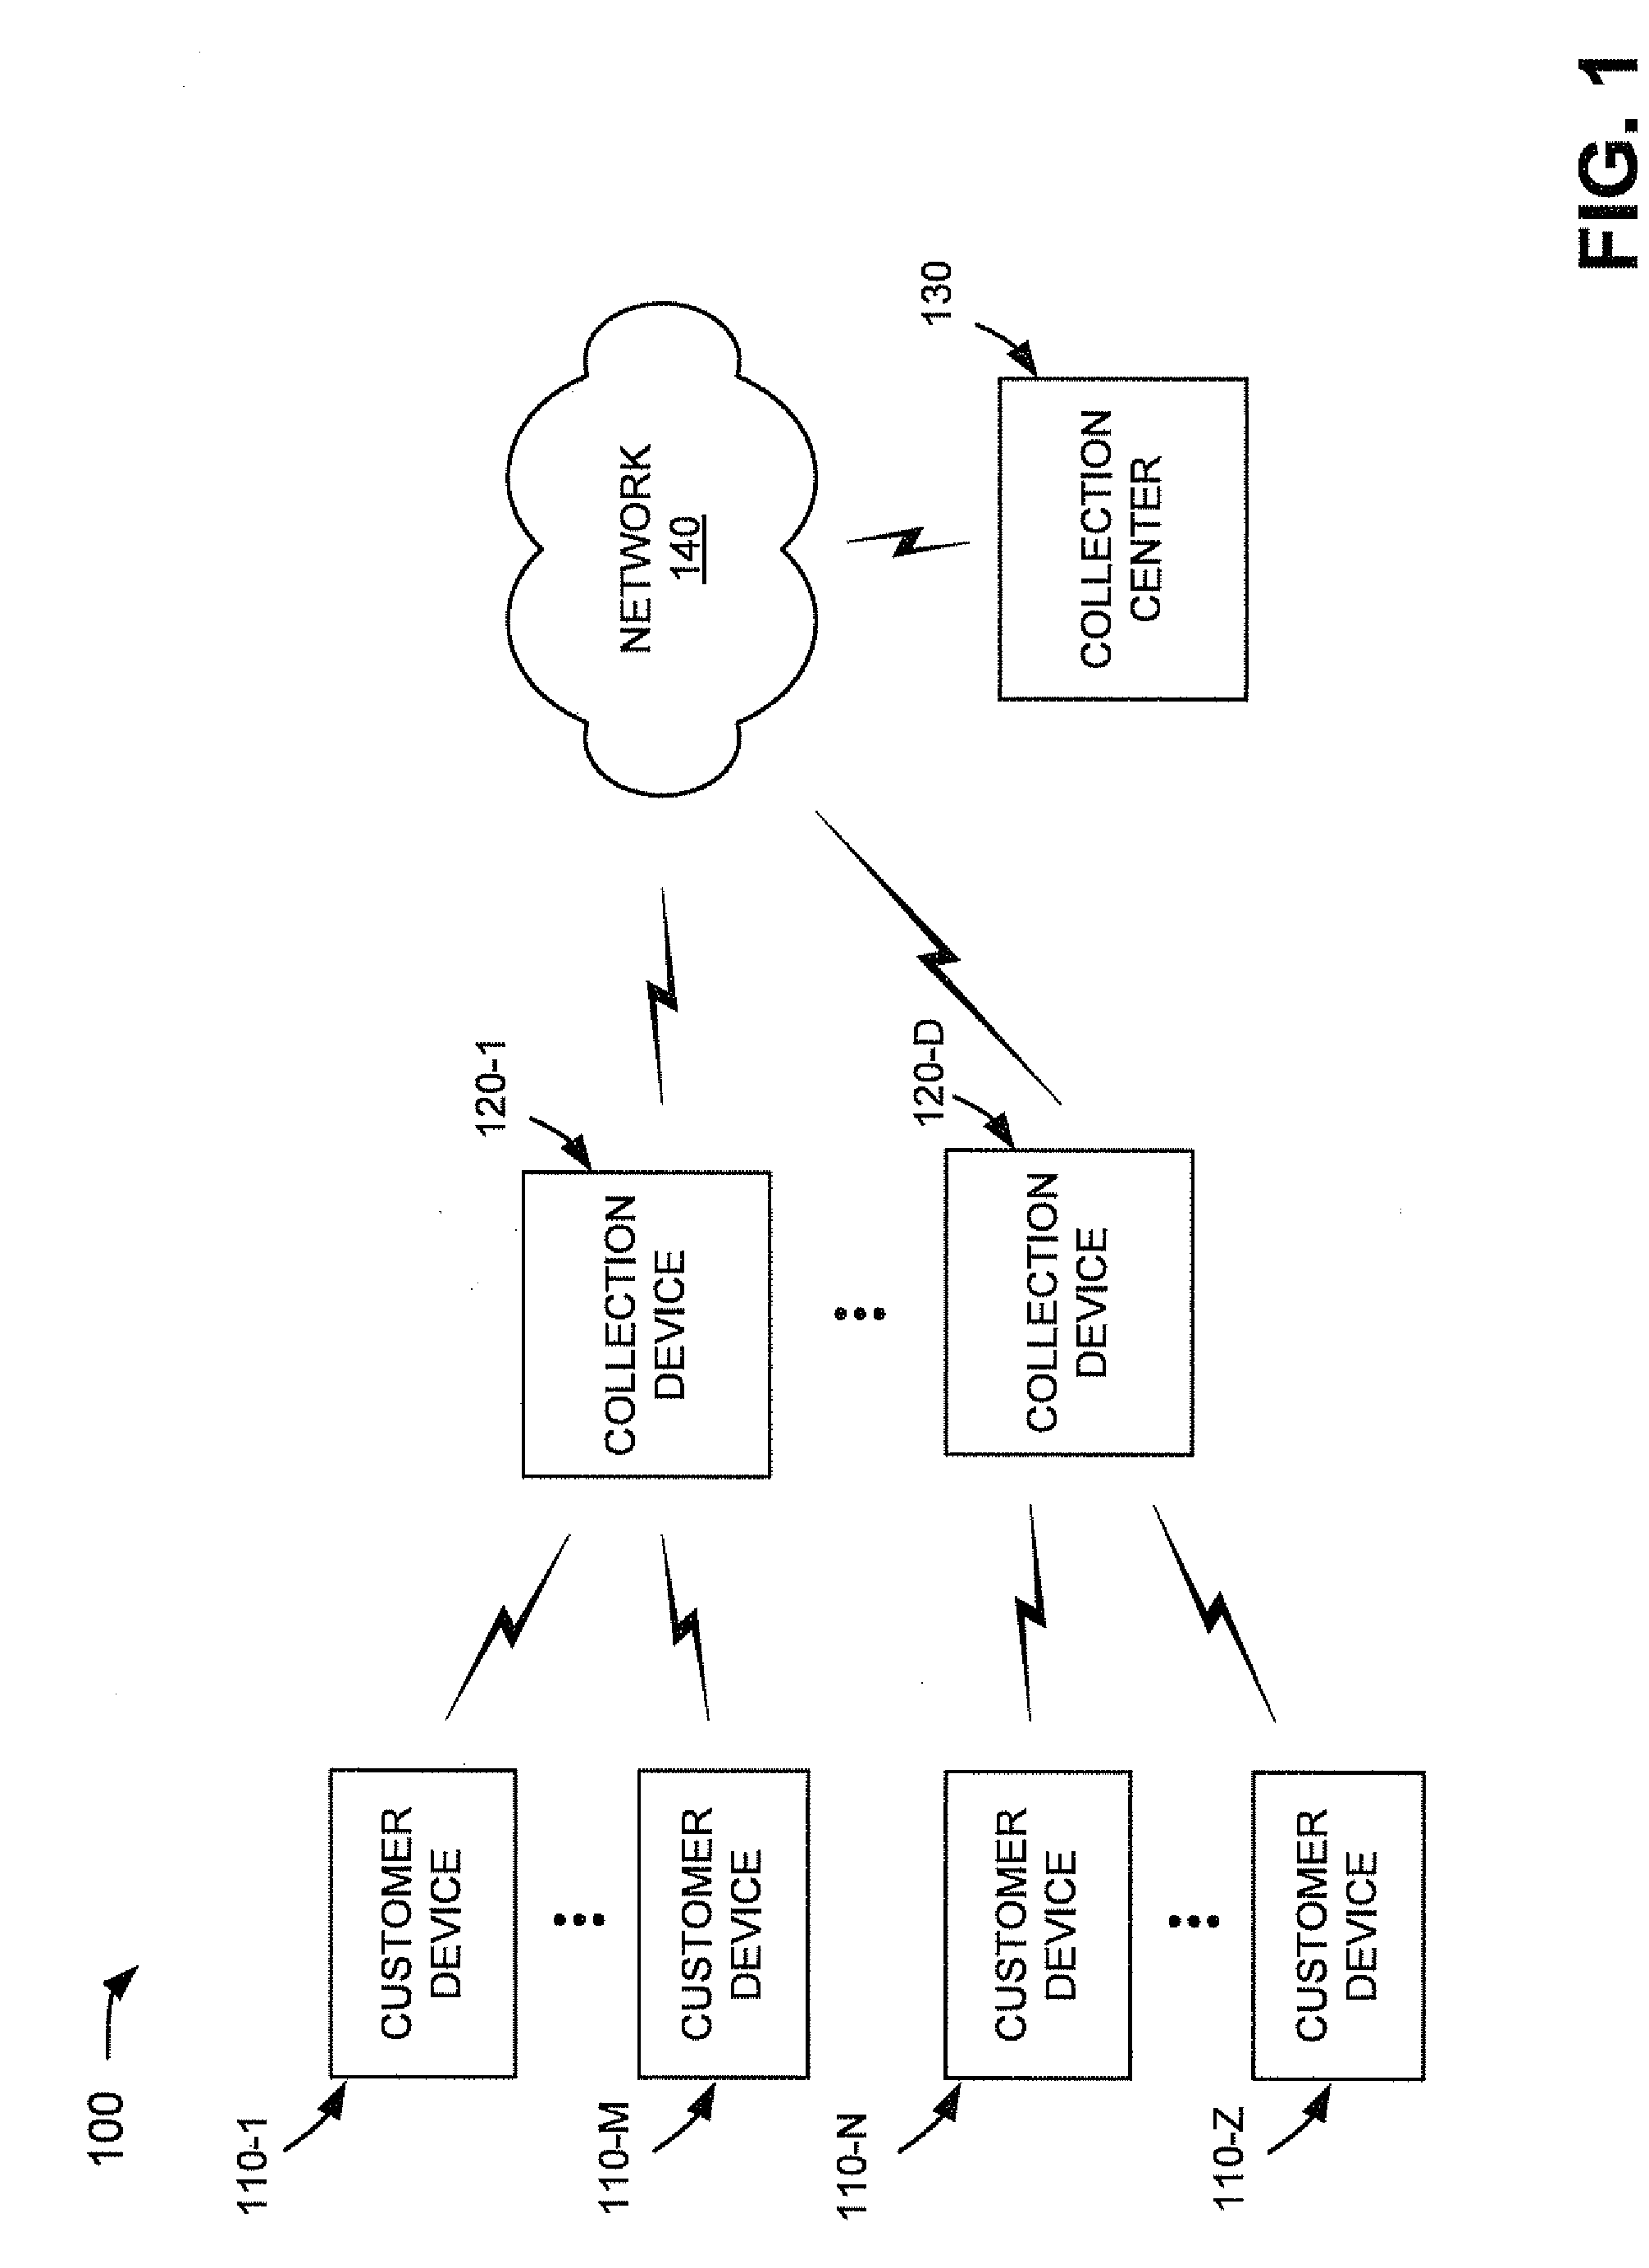 Network usage collection system